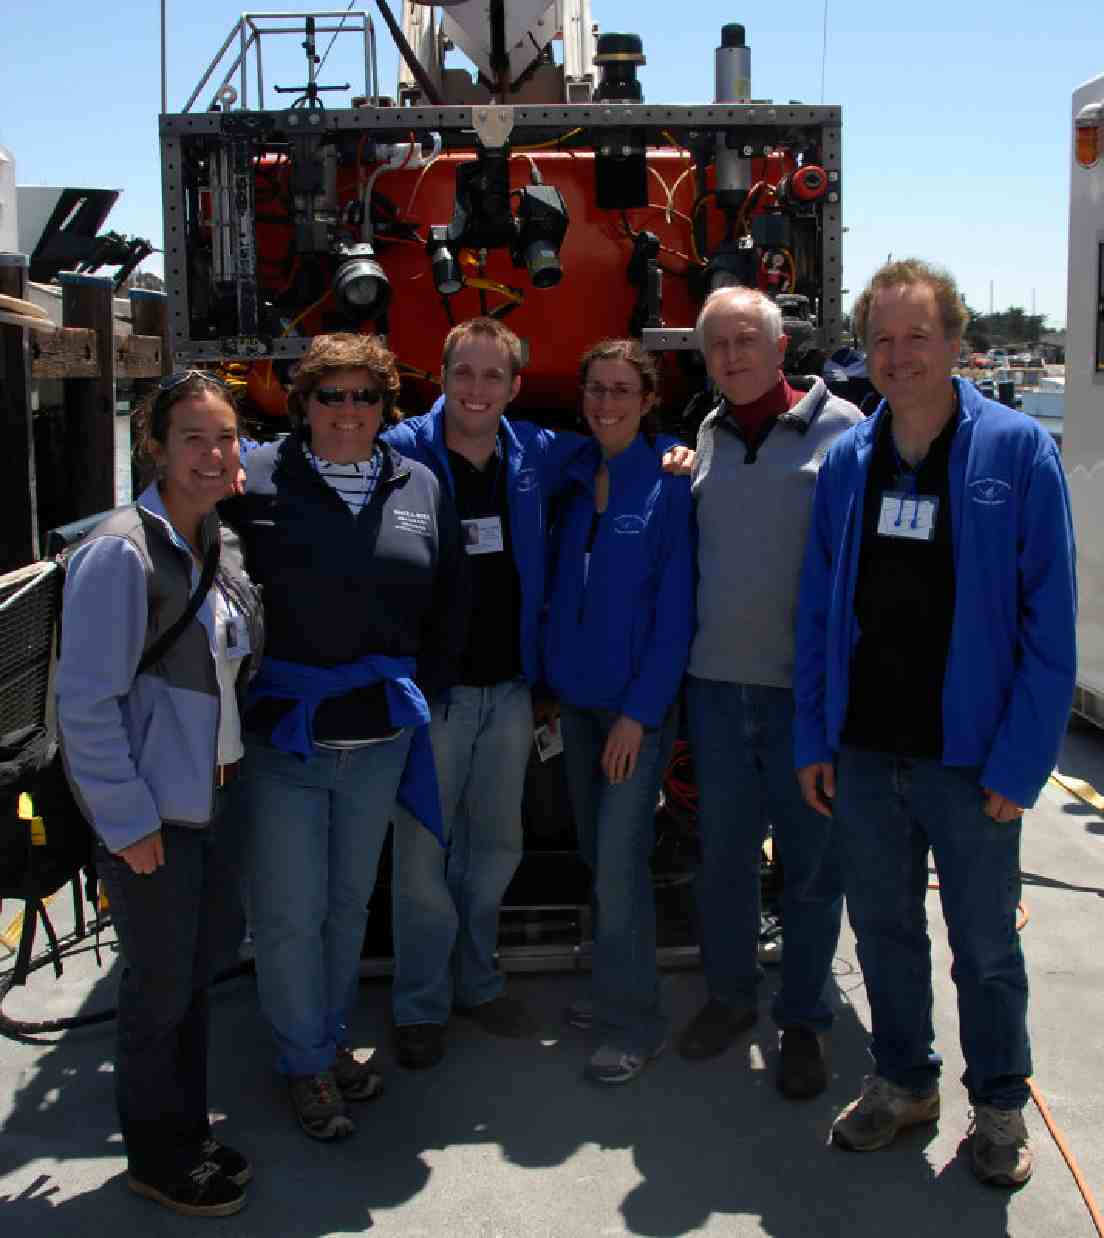 Observing the ROV Ventana perform a deep-water dive into the Monterey Submarine Canyon aboard the R/V Point Lobos proved to be a one-in-a-lifetime experience for Adina Abeles, Mele Williams, Jeff Watters, Dahlia Sokolov, and Ken Calderia while Peter Brewer explained life in the cold and low-oxygen/high-CO2 waters.